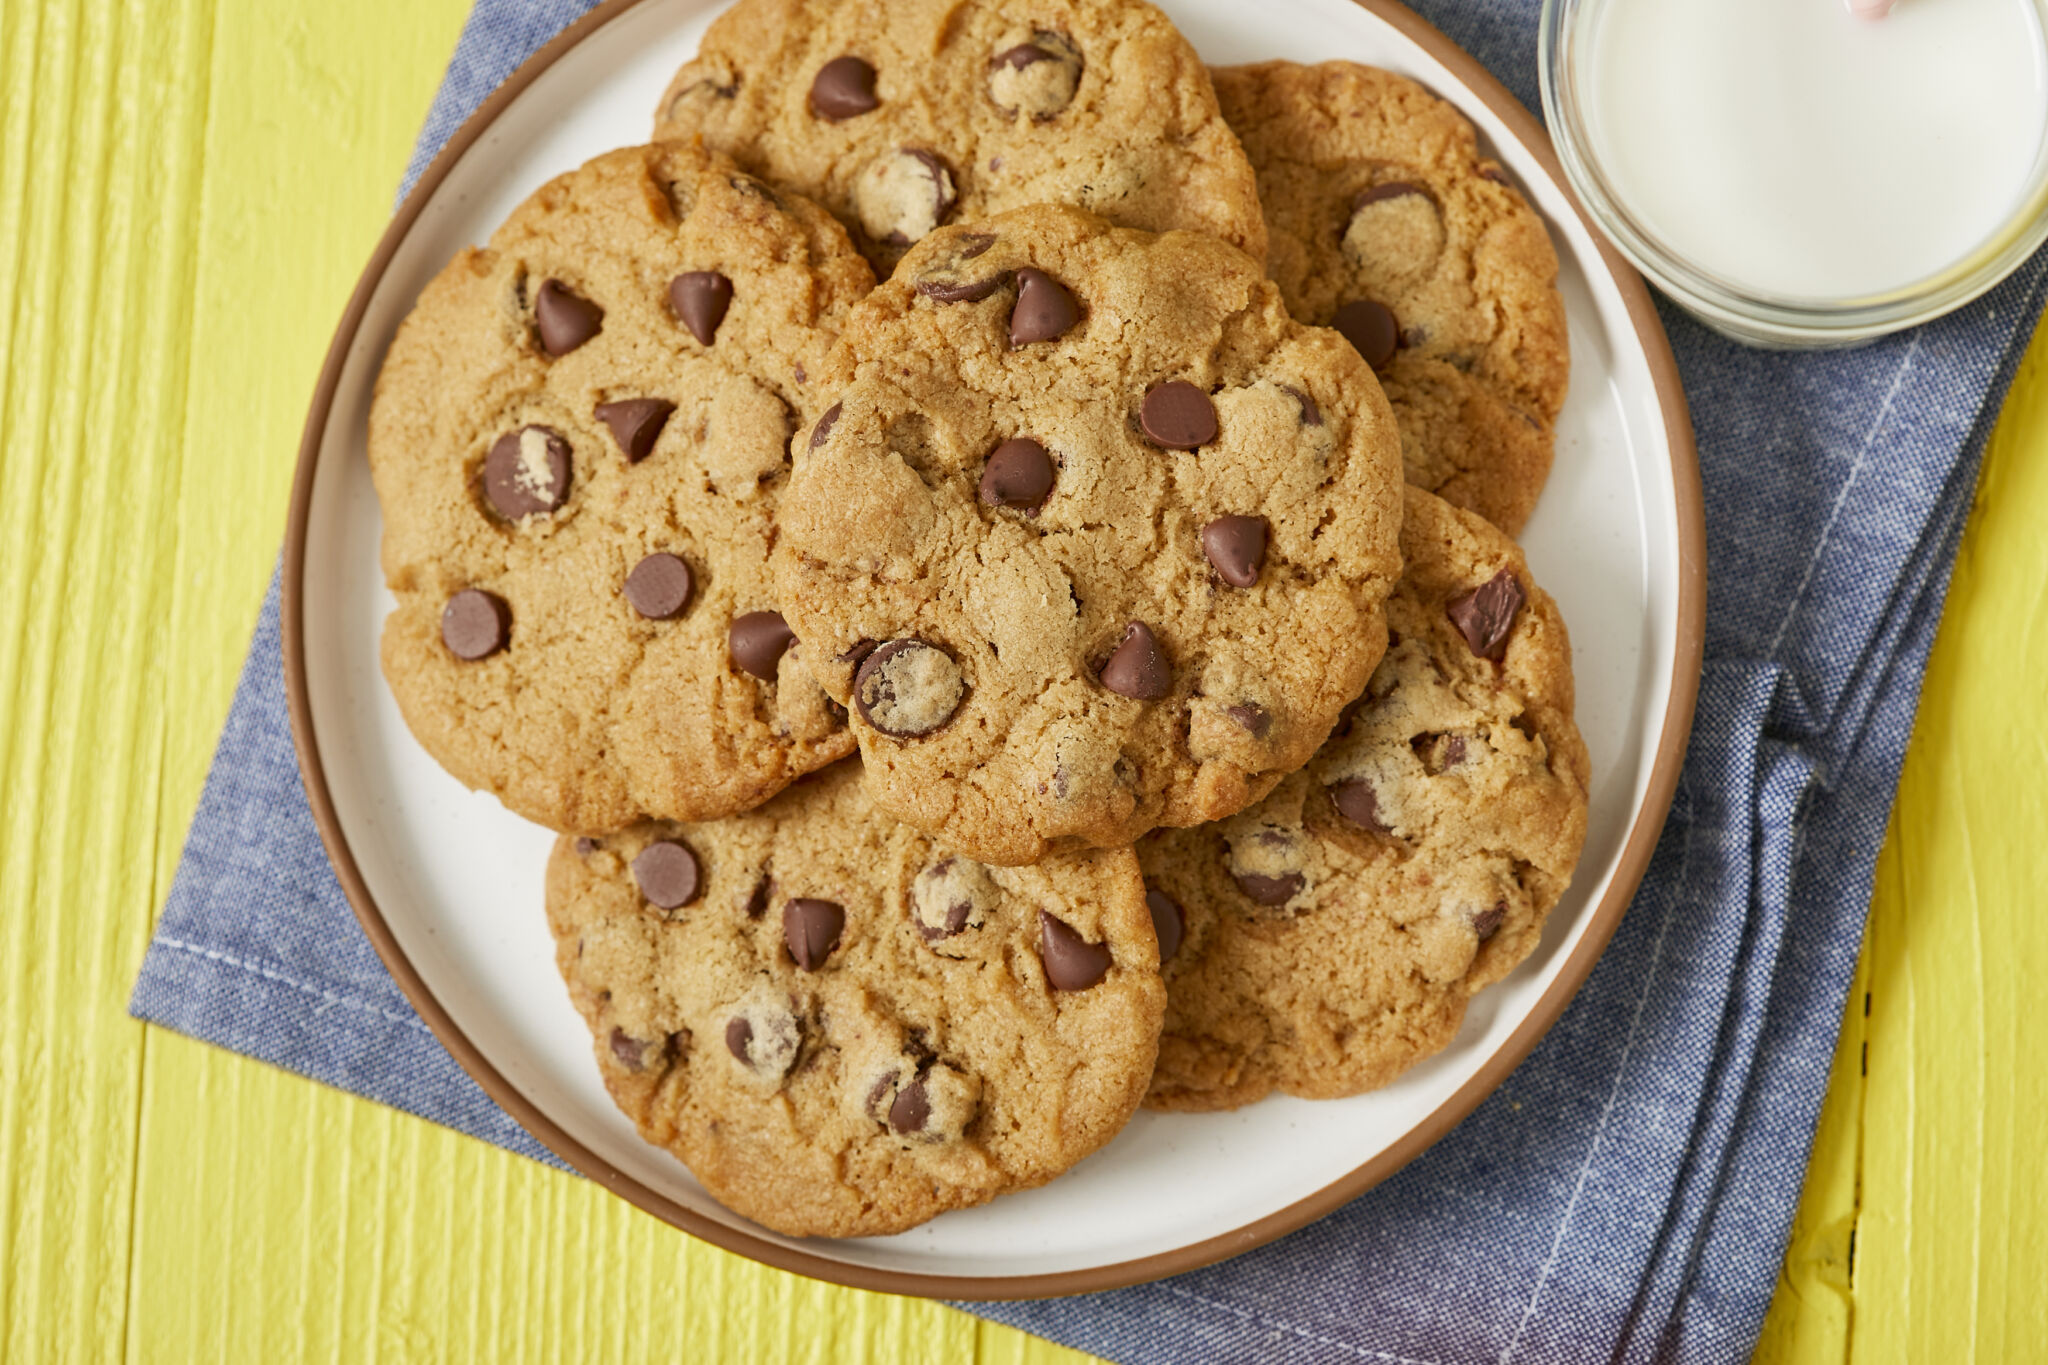 A plate of homemade crunchy Chips Ahoy! cookies loaded with chocolate chips into each bite.